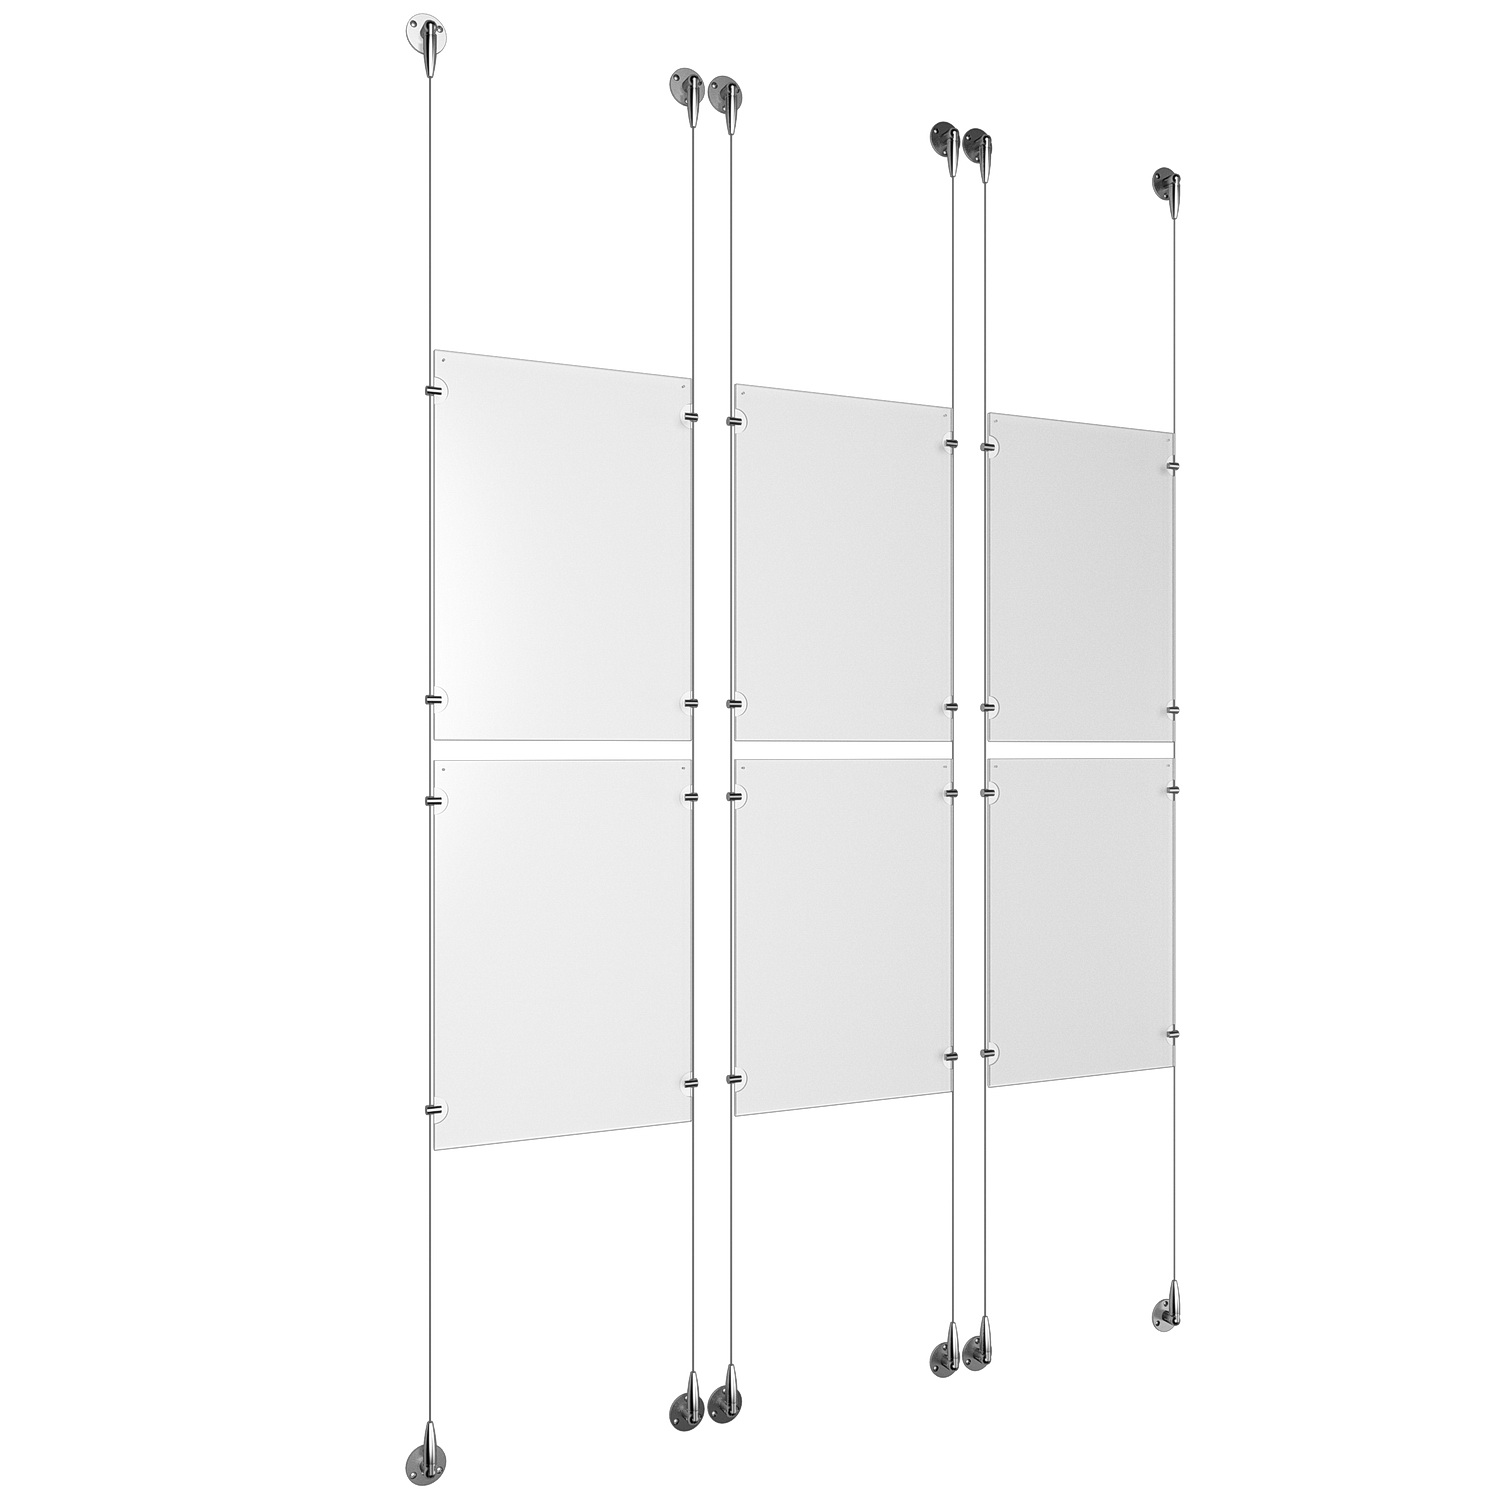 (2) 11'' Width x 17'' Height Clear Acrylic Frame & (1) Aluminum Chrome Polished Adjustable Angle Signature Cable Systems with (4) Single-Sided Panel Grippers (4) Double-Sided Panel Grippers